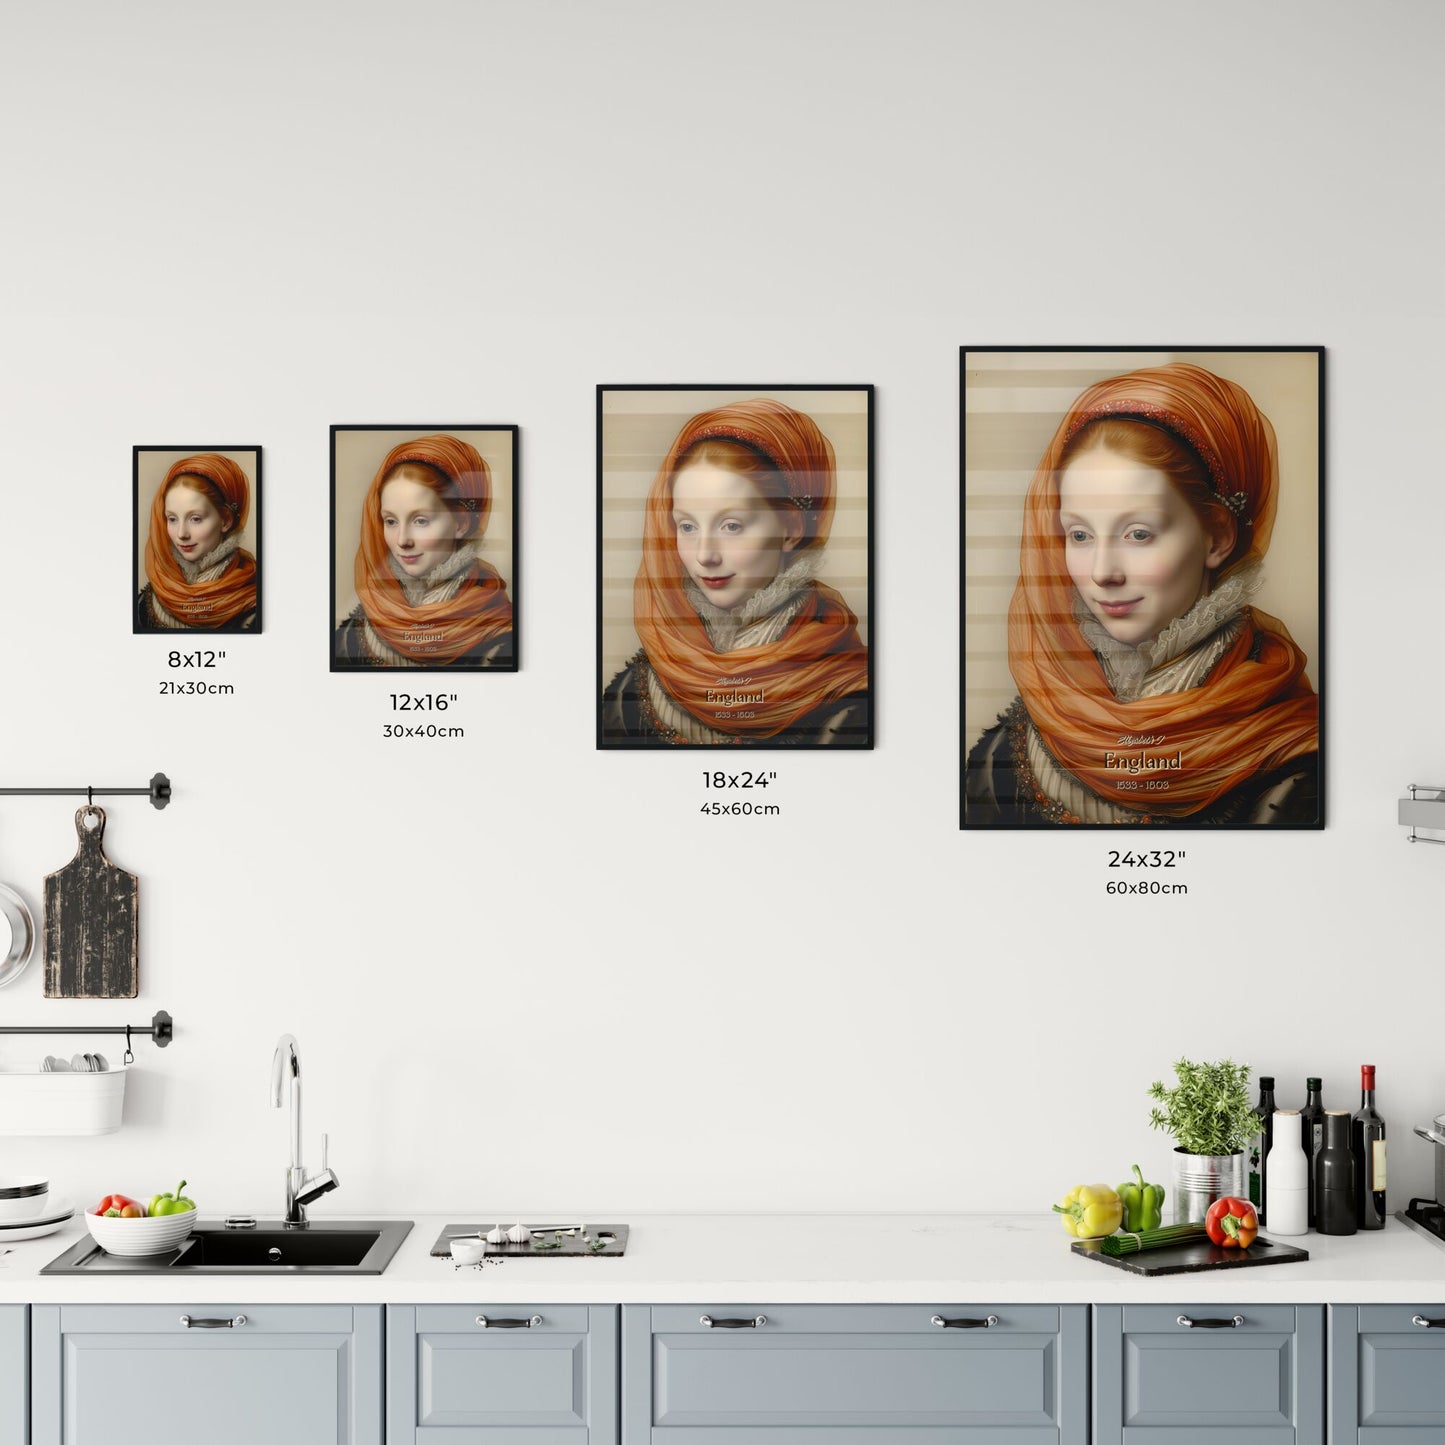 Elizabeth I, England, 1533 - 1603, A Poster of a woman with a red head scarf Default Title